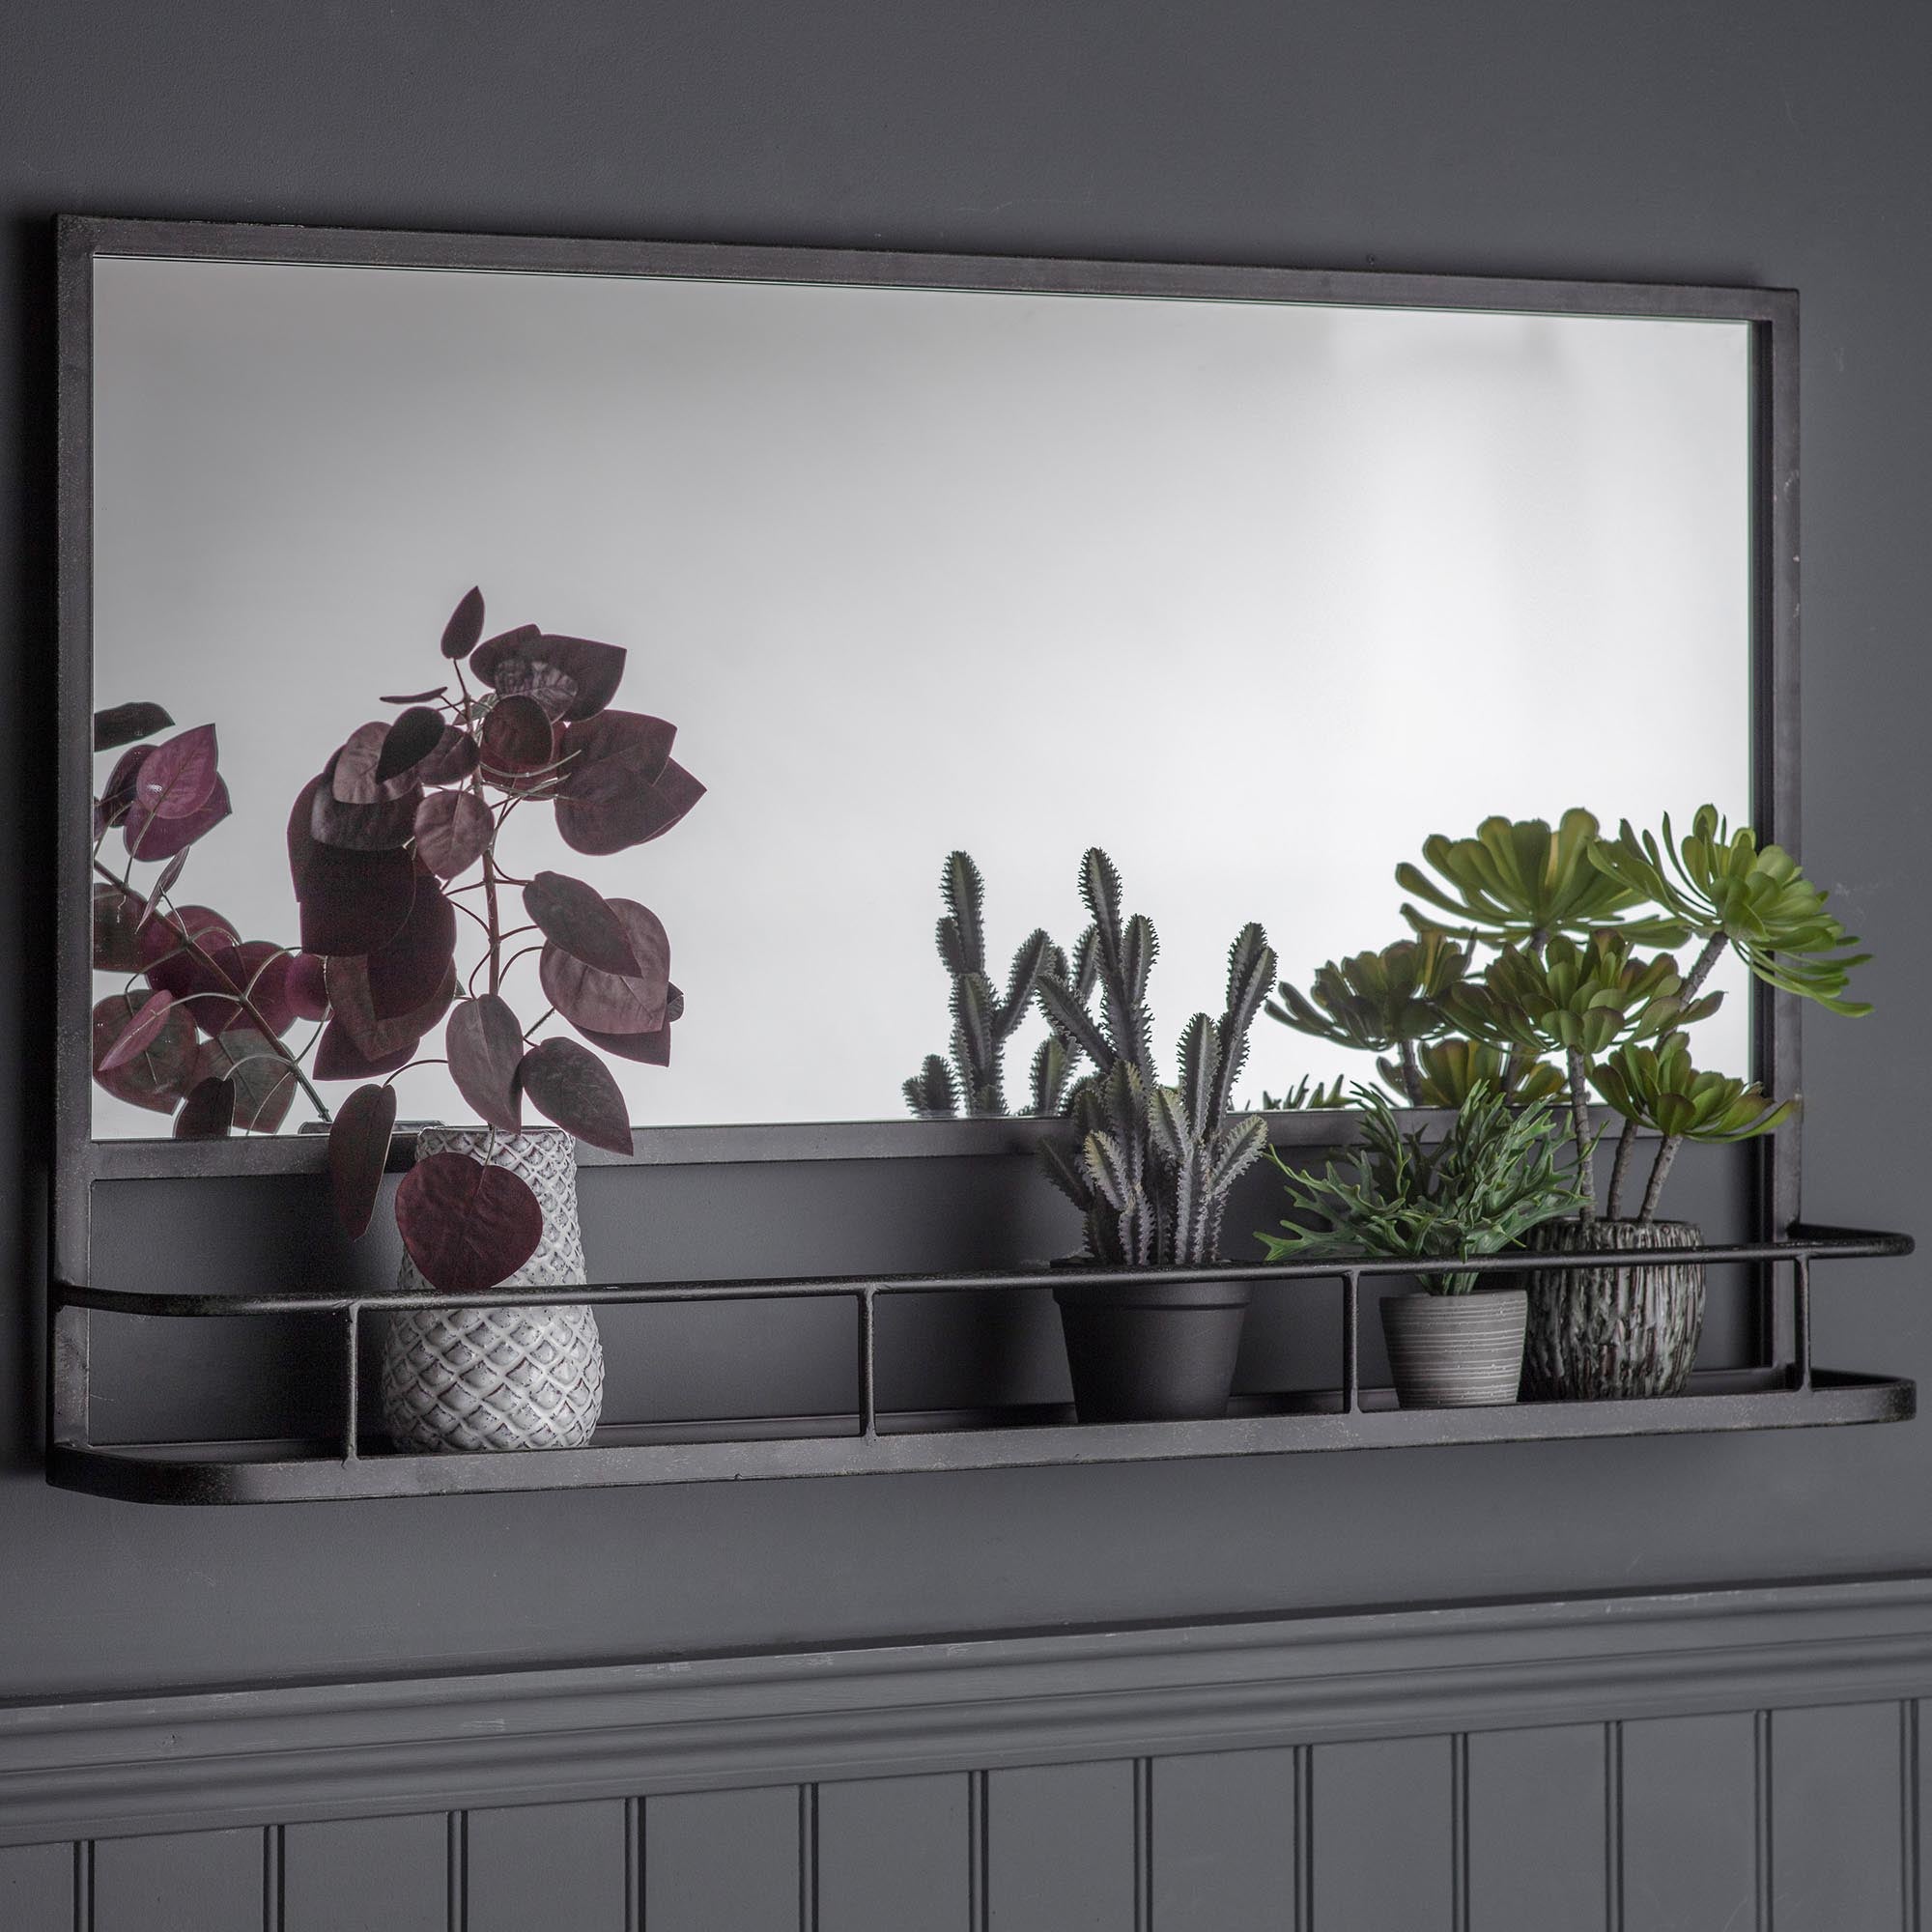 Argentine Rectangle Overmantel Wall Mirror with Shelf